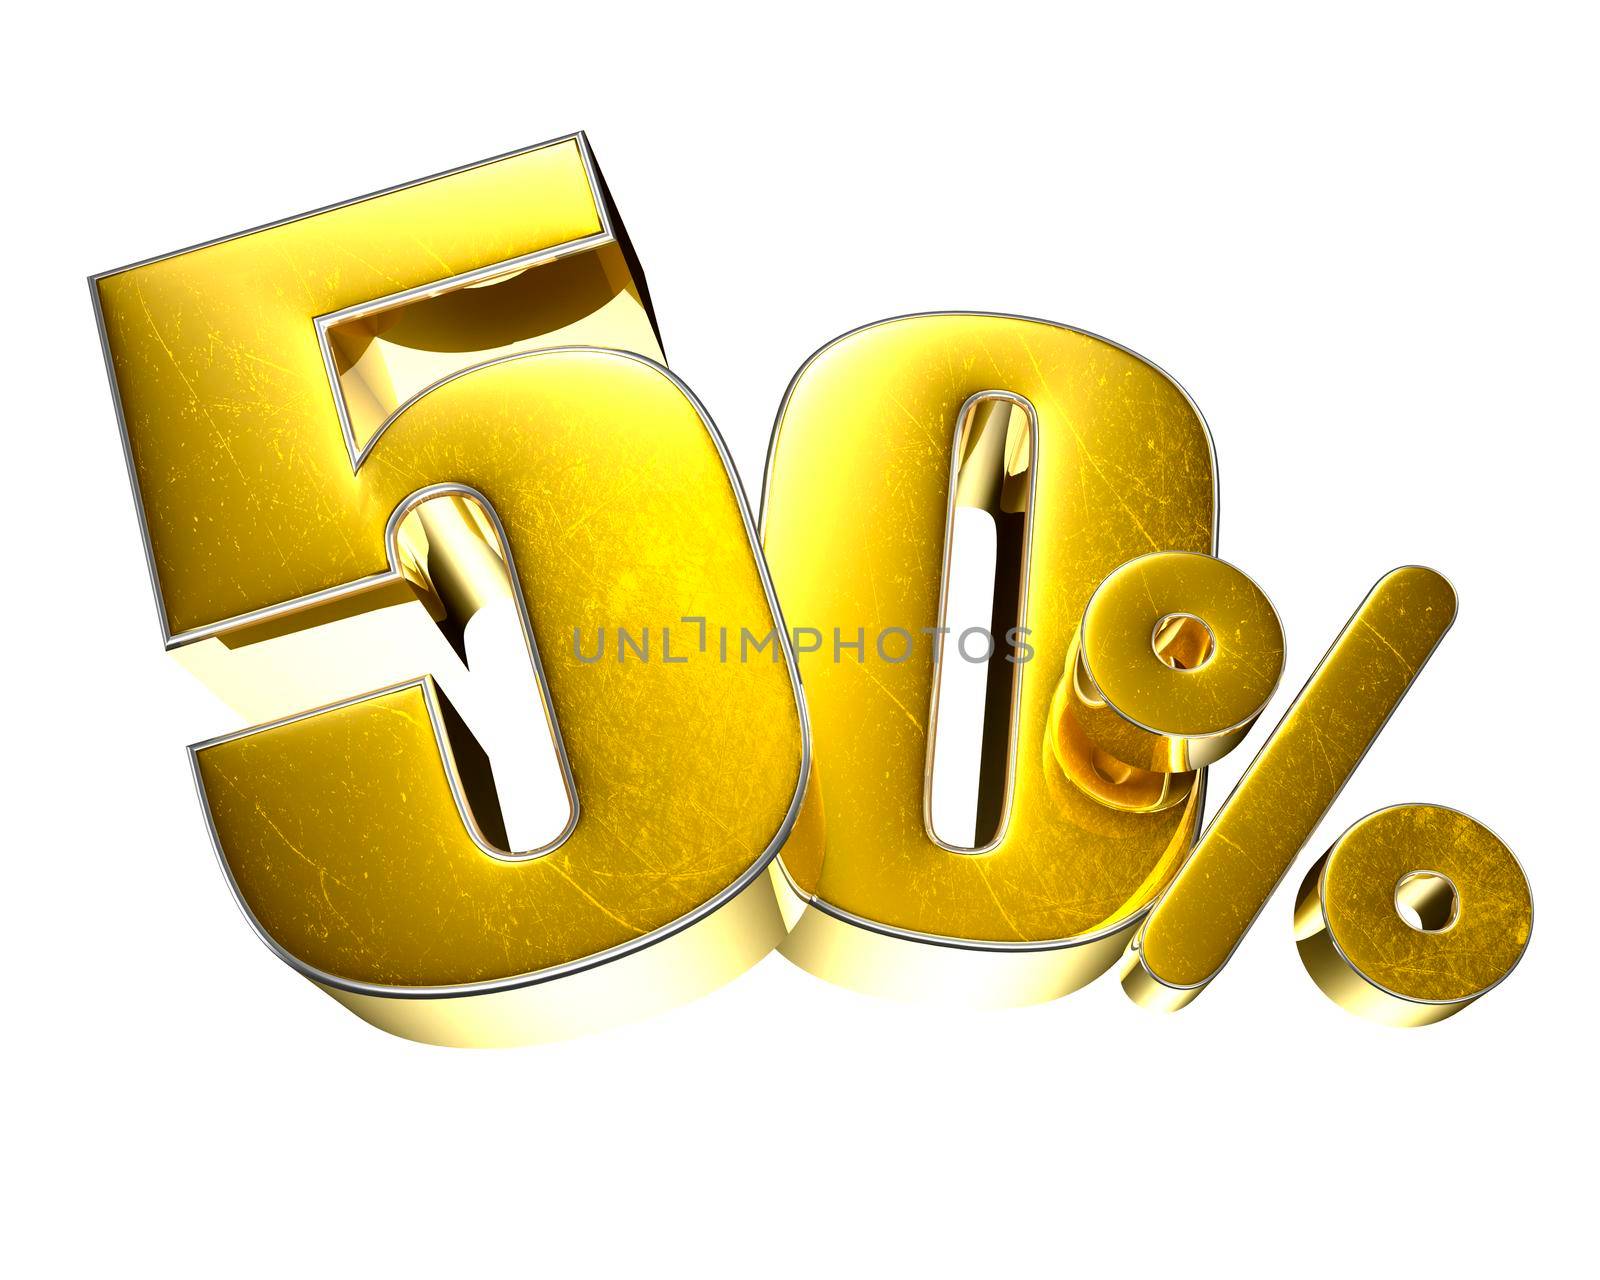 50 Percent Gold 3D illustration on a white background with clipping path.